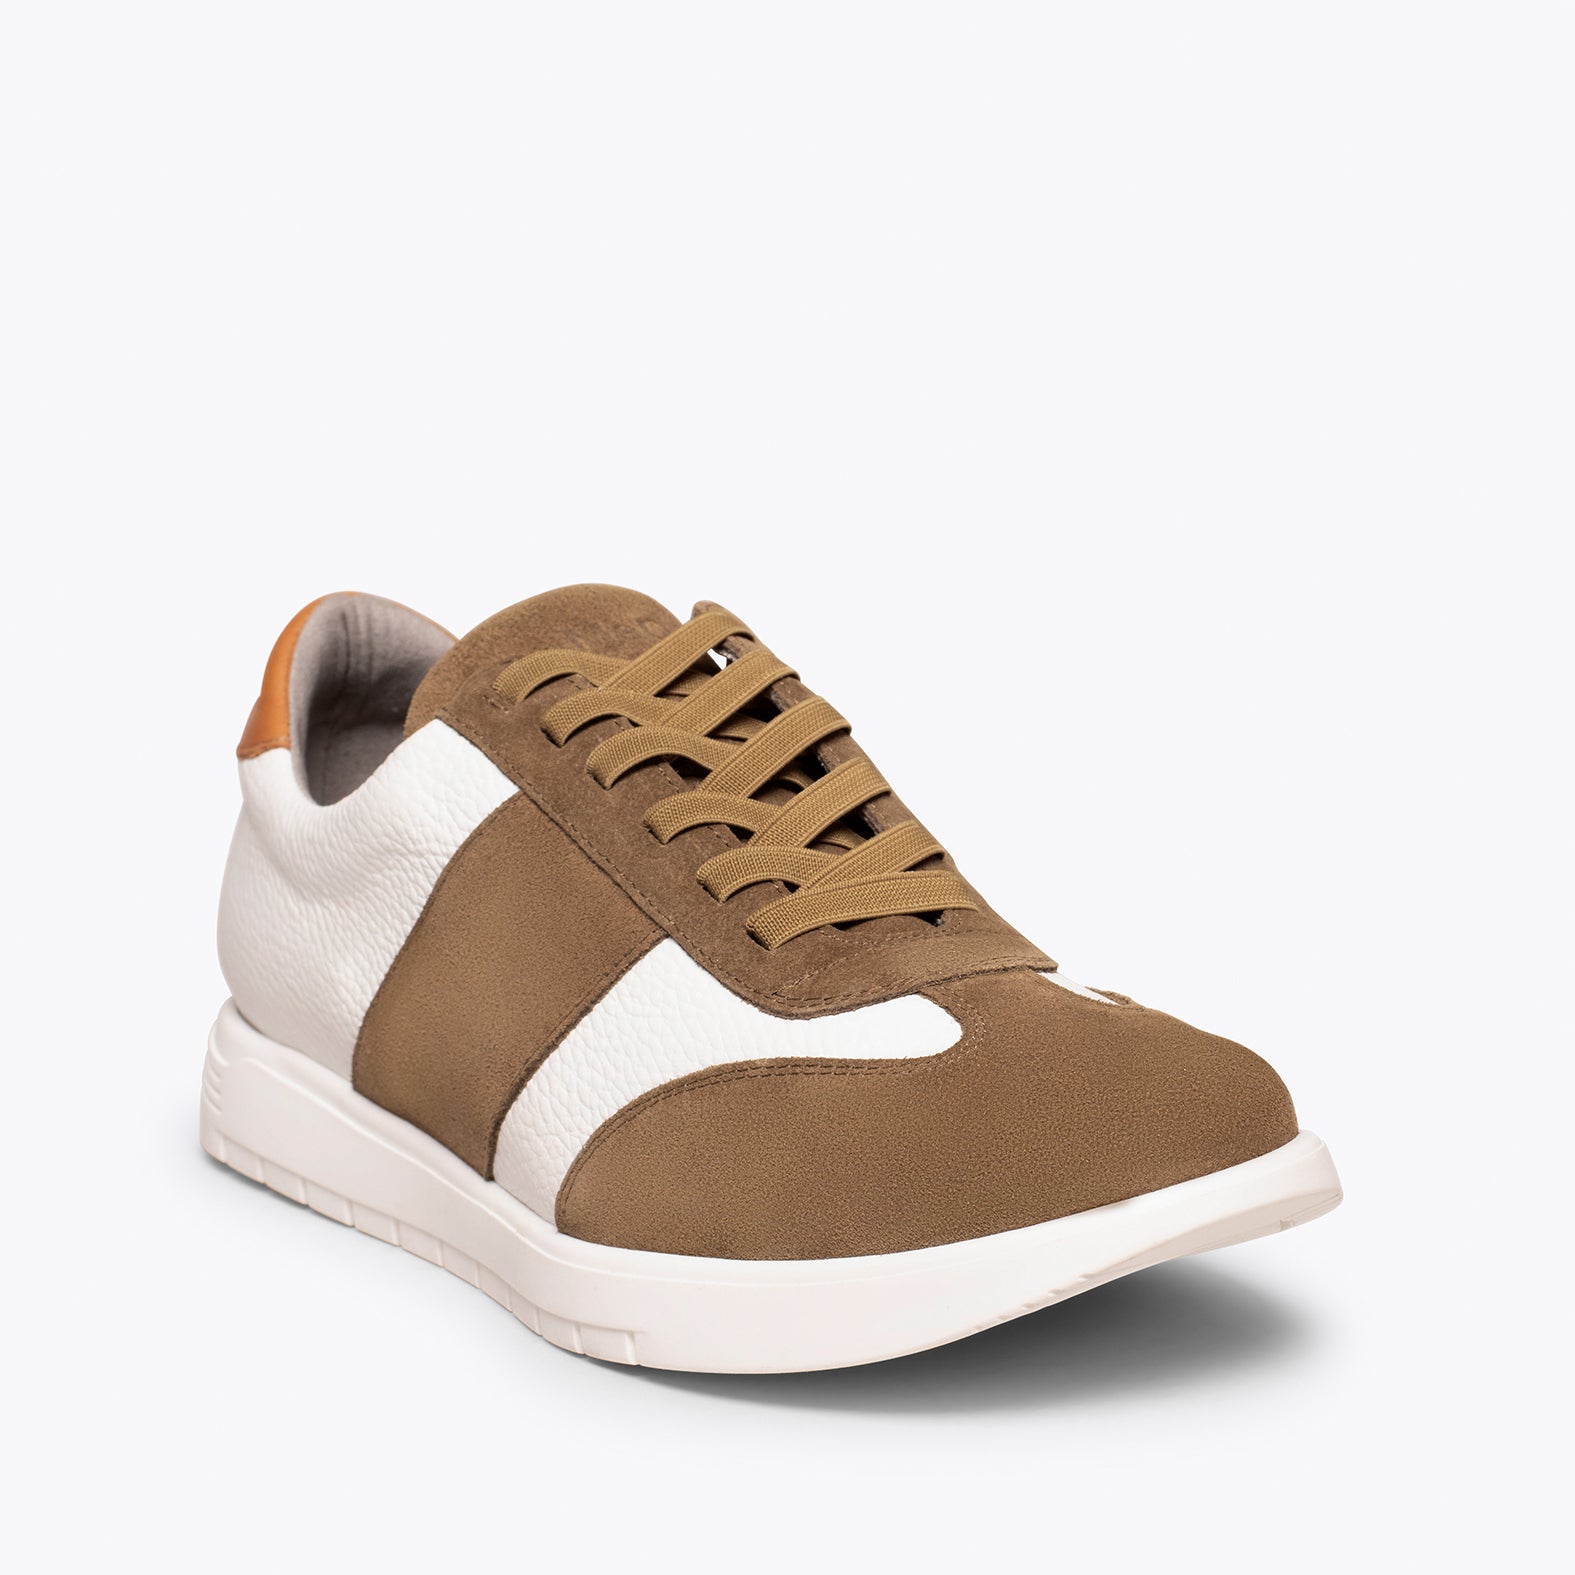 SPORT  - WHITE AND TAUPE mixed leather sneaker for men